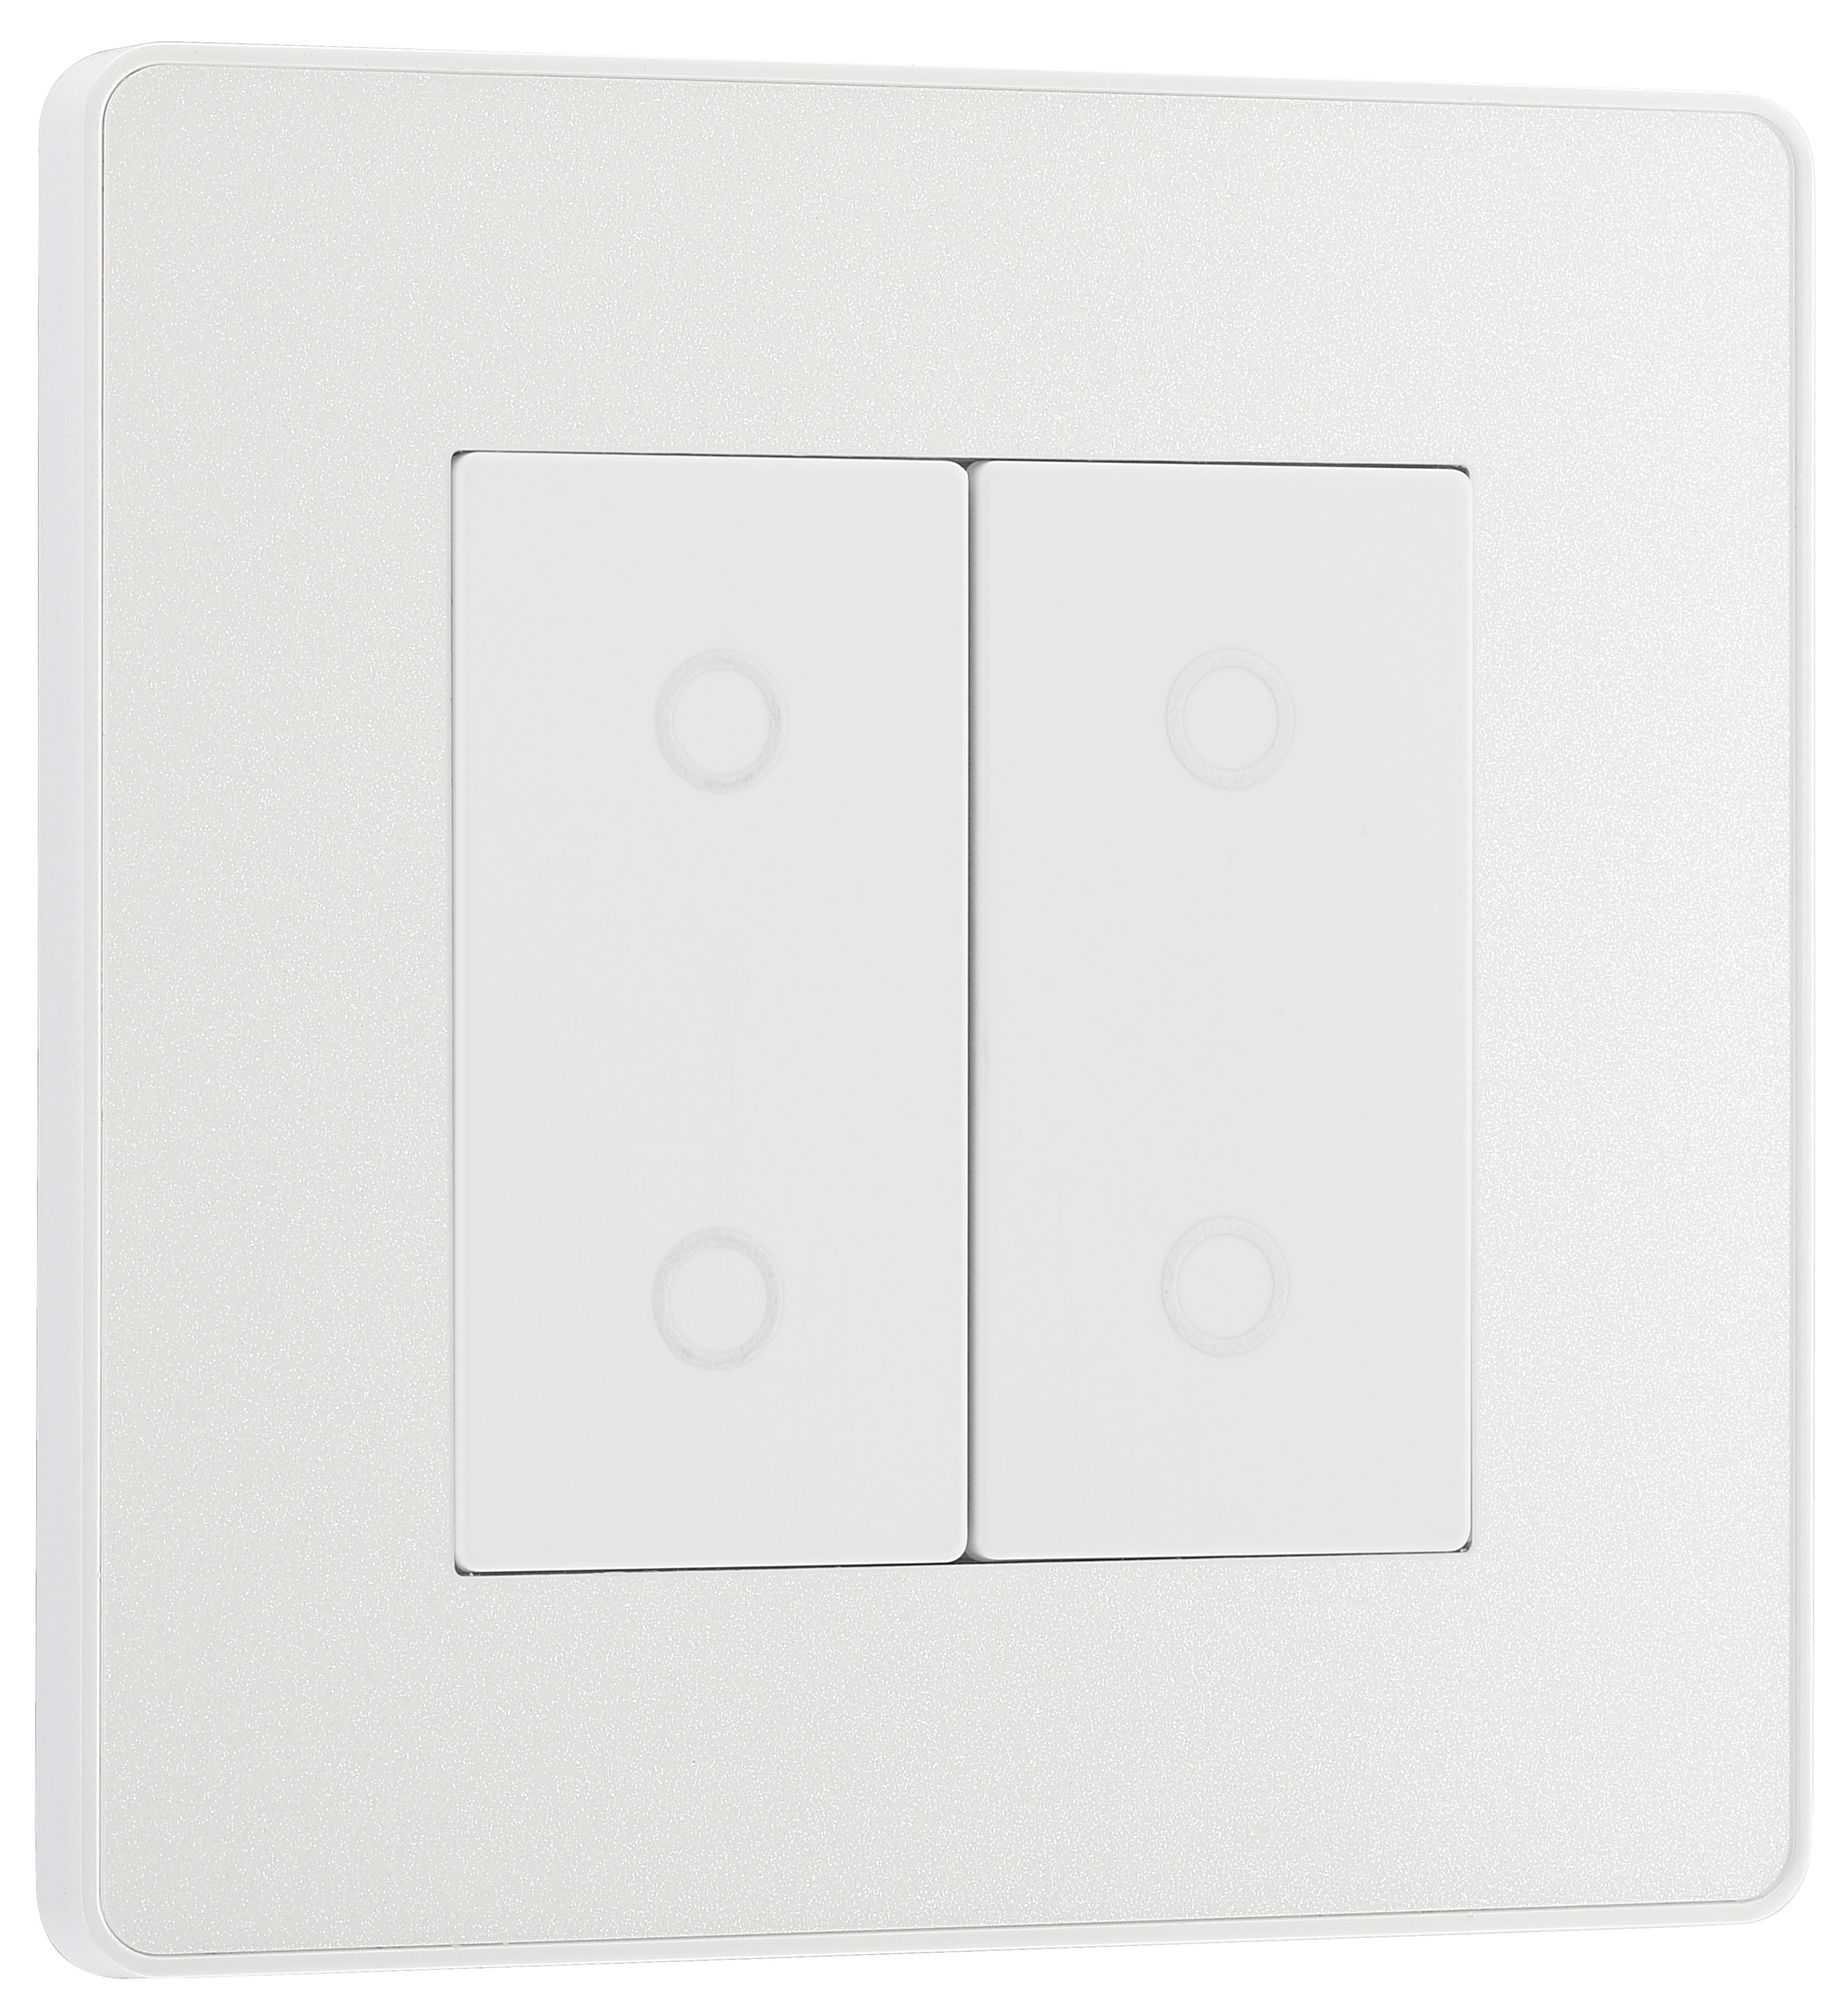 Image of BG Evolve Pearlescent White 2 Way Master Double Touch Dimmer Switch - 200W